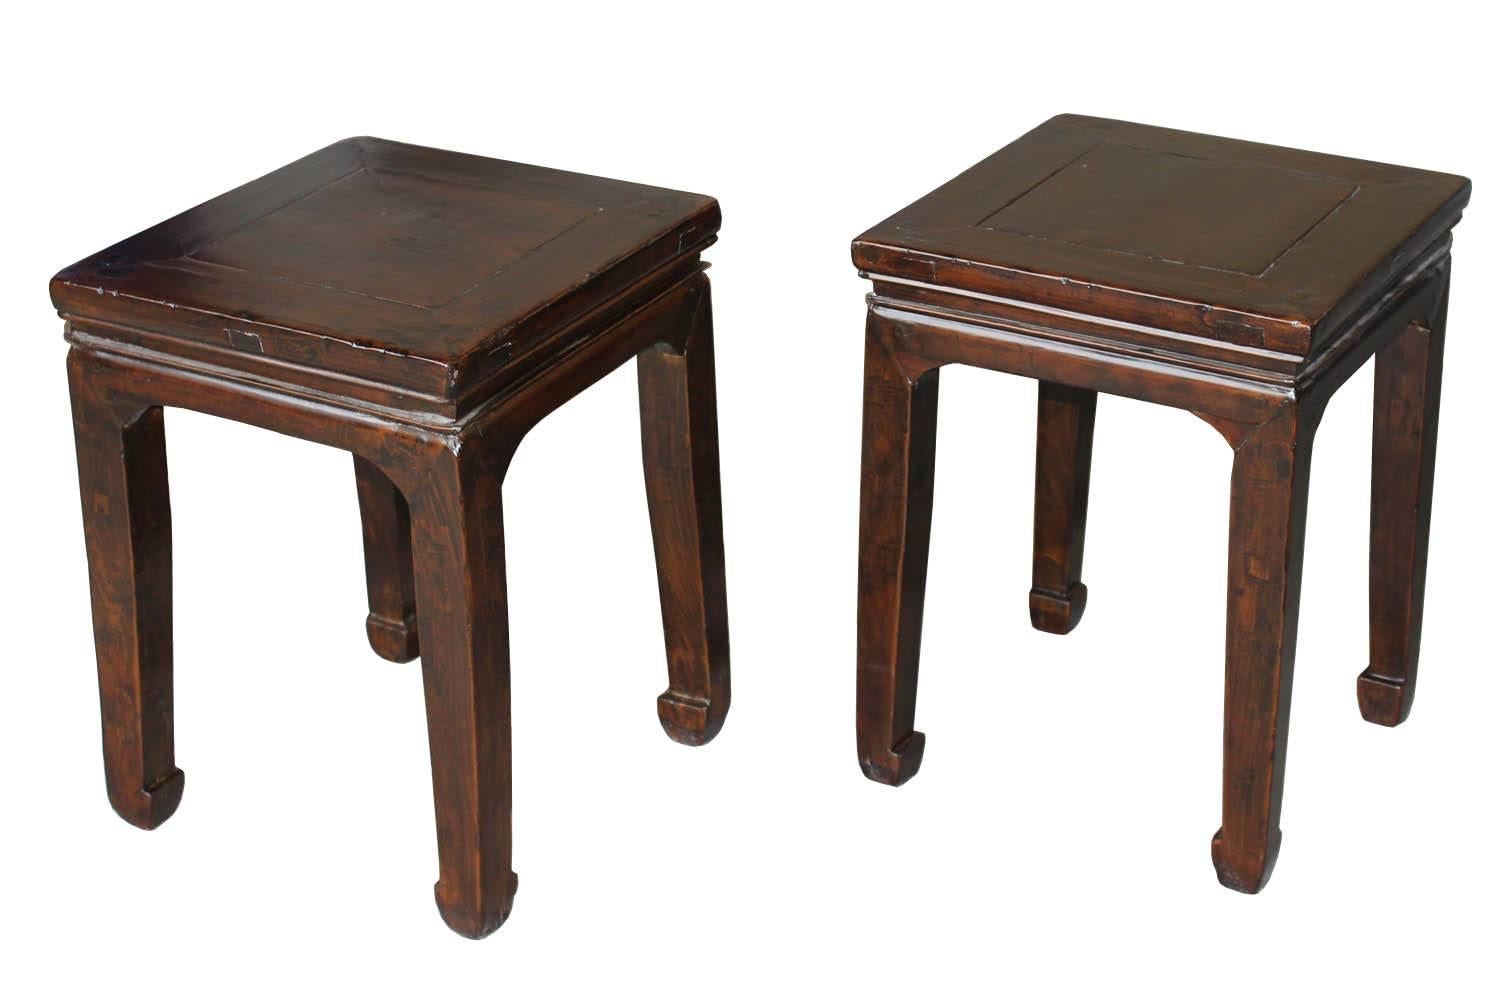 Elm Ming style side table with beautiful elm grain has a recessed top and elegant horse-hoof feet. Versatile to use as coffee tables in front of a sofa or as side tables next to armchairs. Available and priced individually.